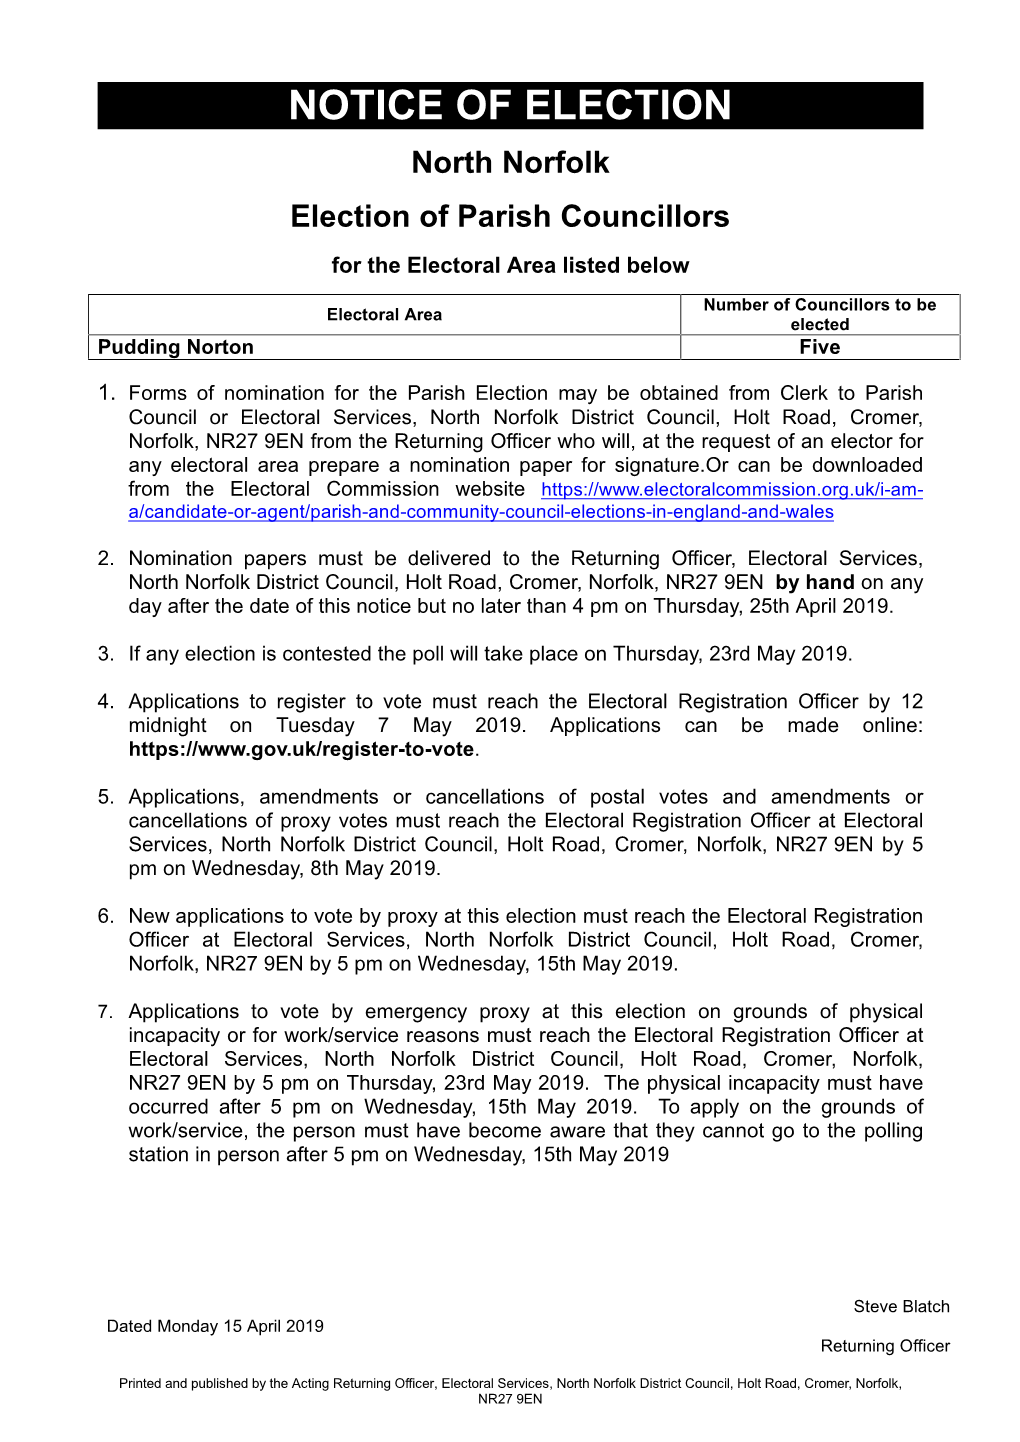 NOTICE of ELECTION North Norfolk Election of Parish Councillors for the Electoral Area Listed Below